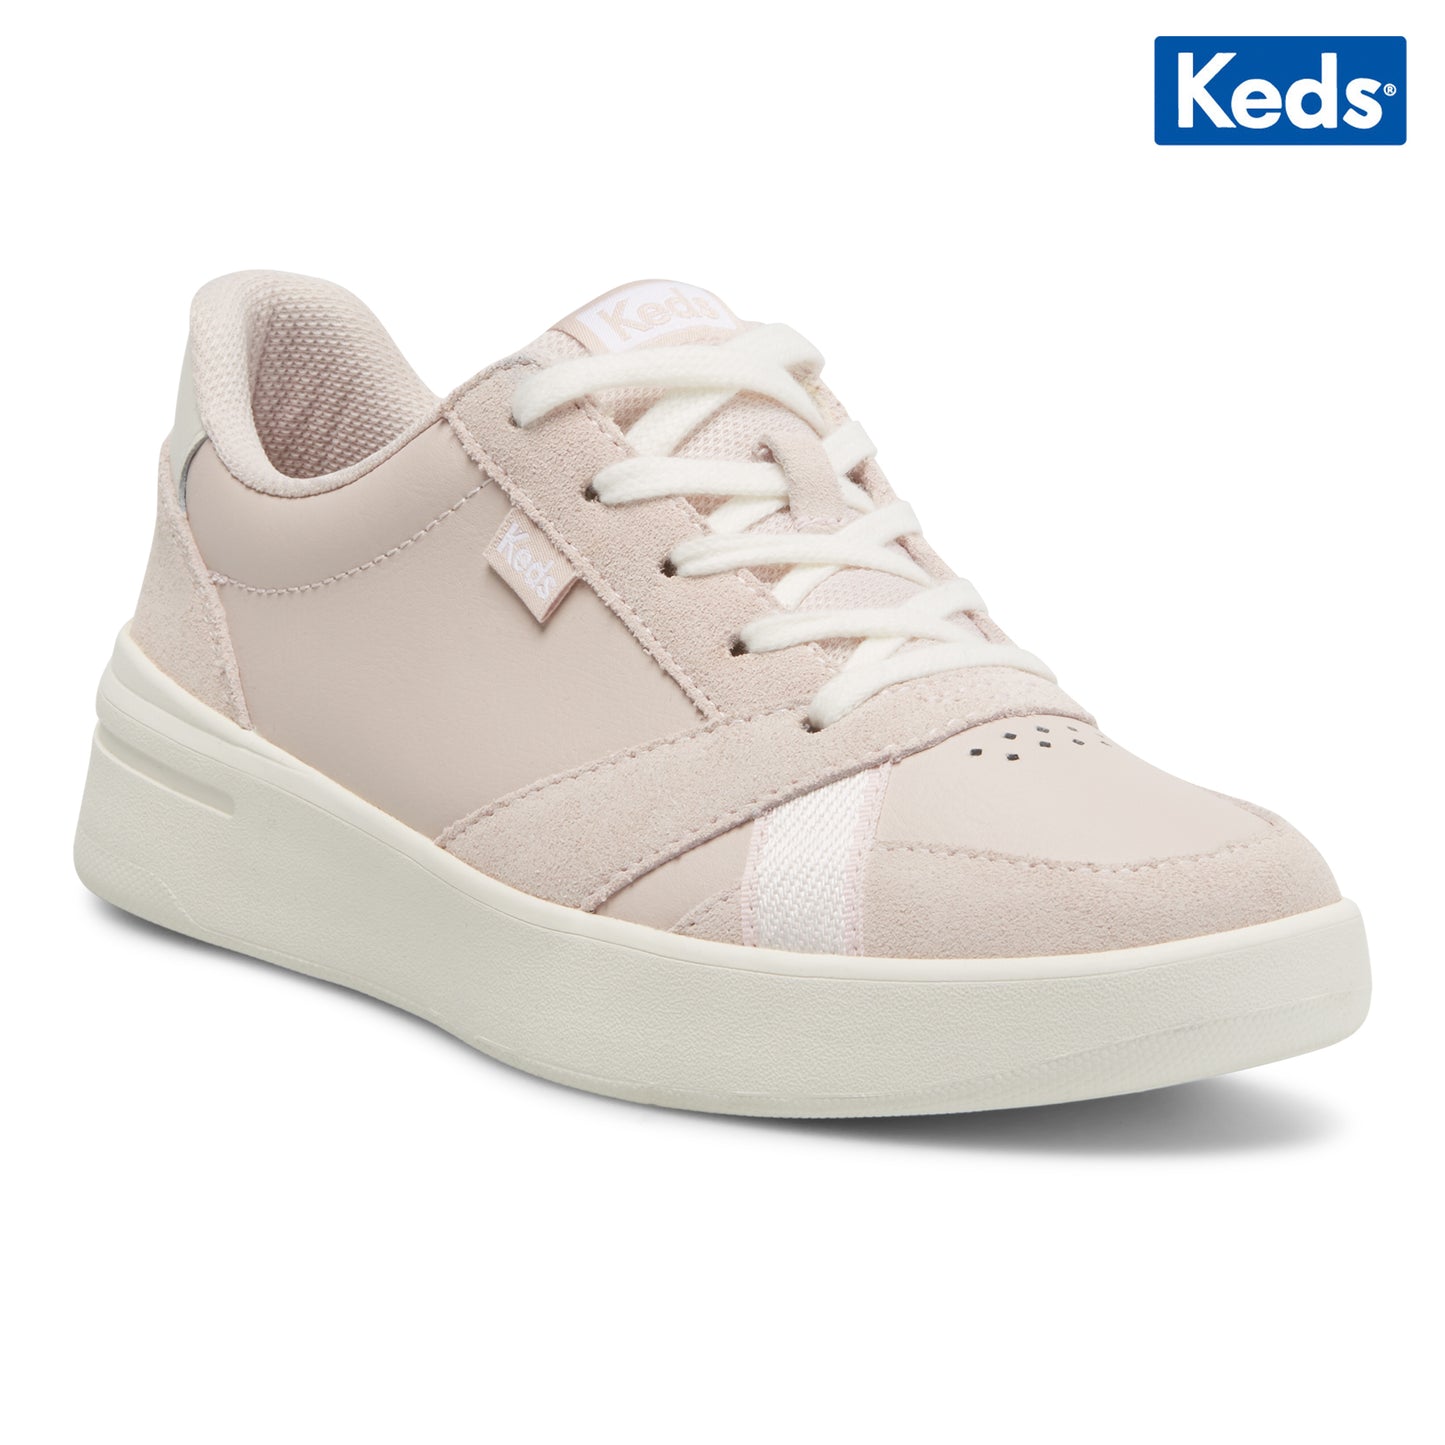 Keds Women's The Court Leather--Lpkw-Light Pink/White